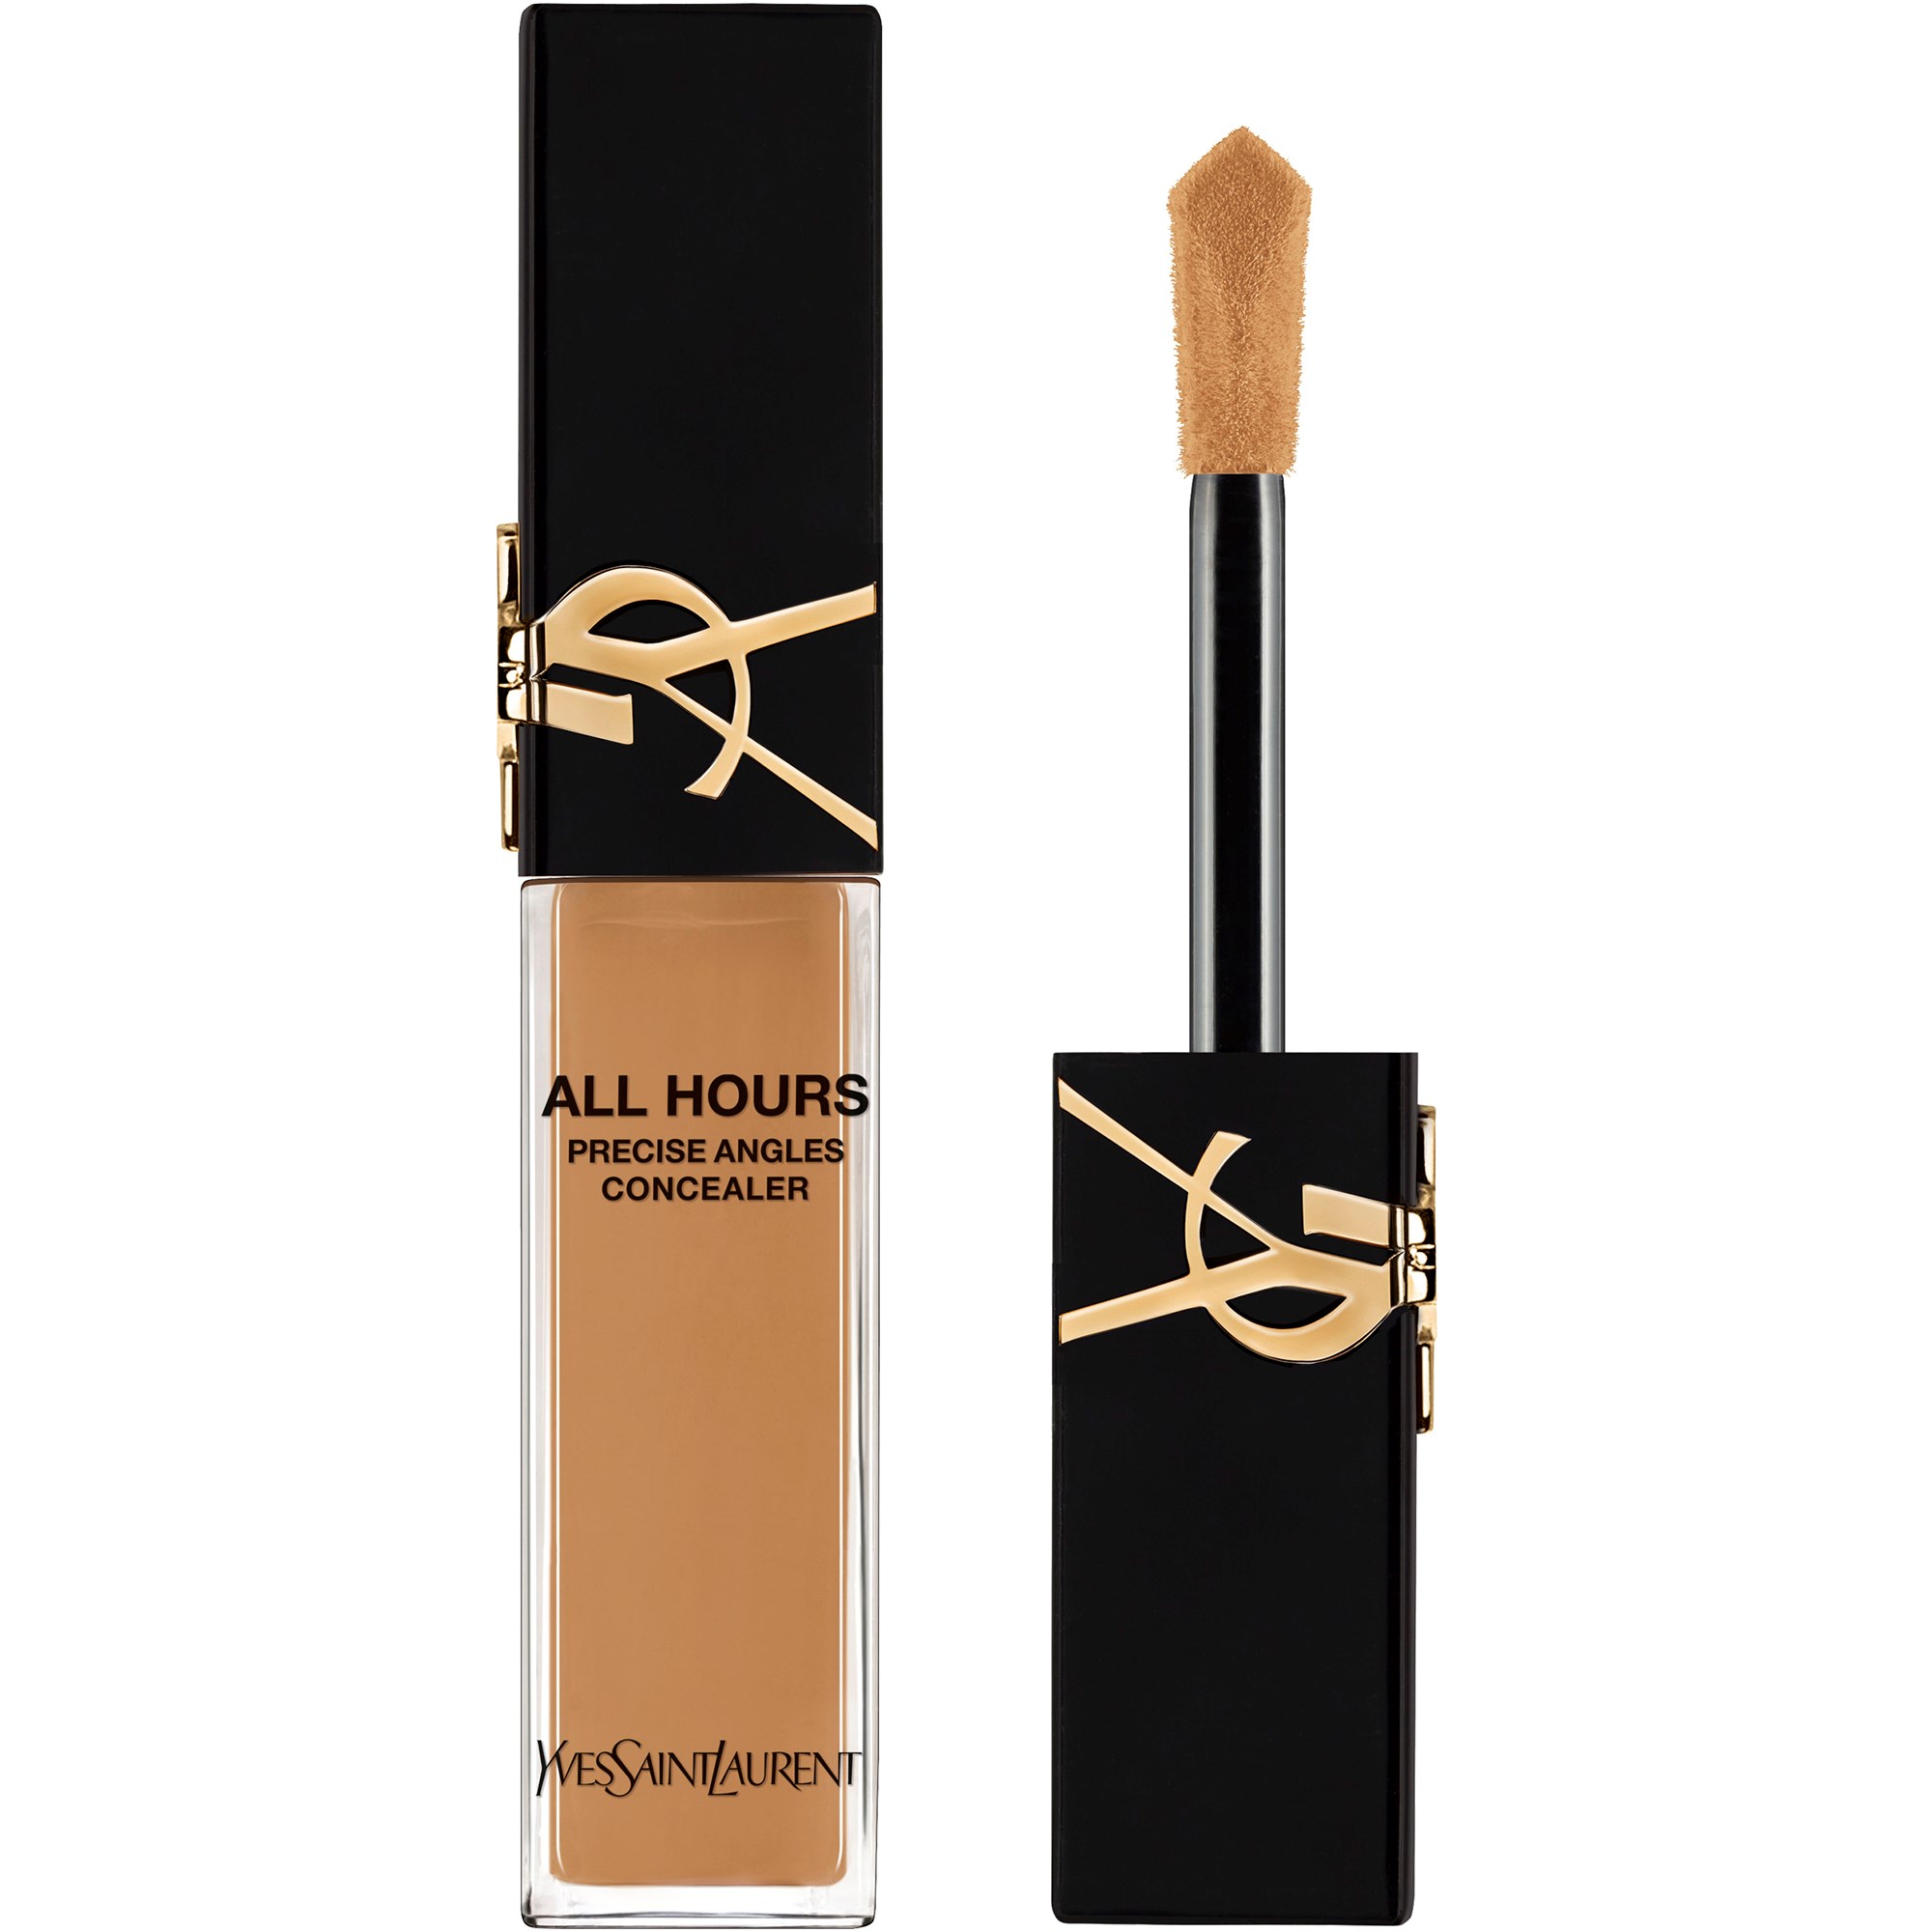 Yves Saint Laurent All Hours Precise Angles Concealer DW1